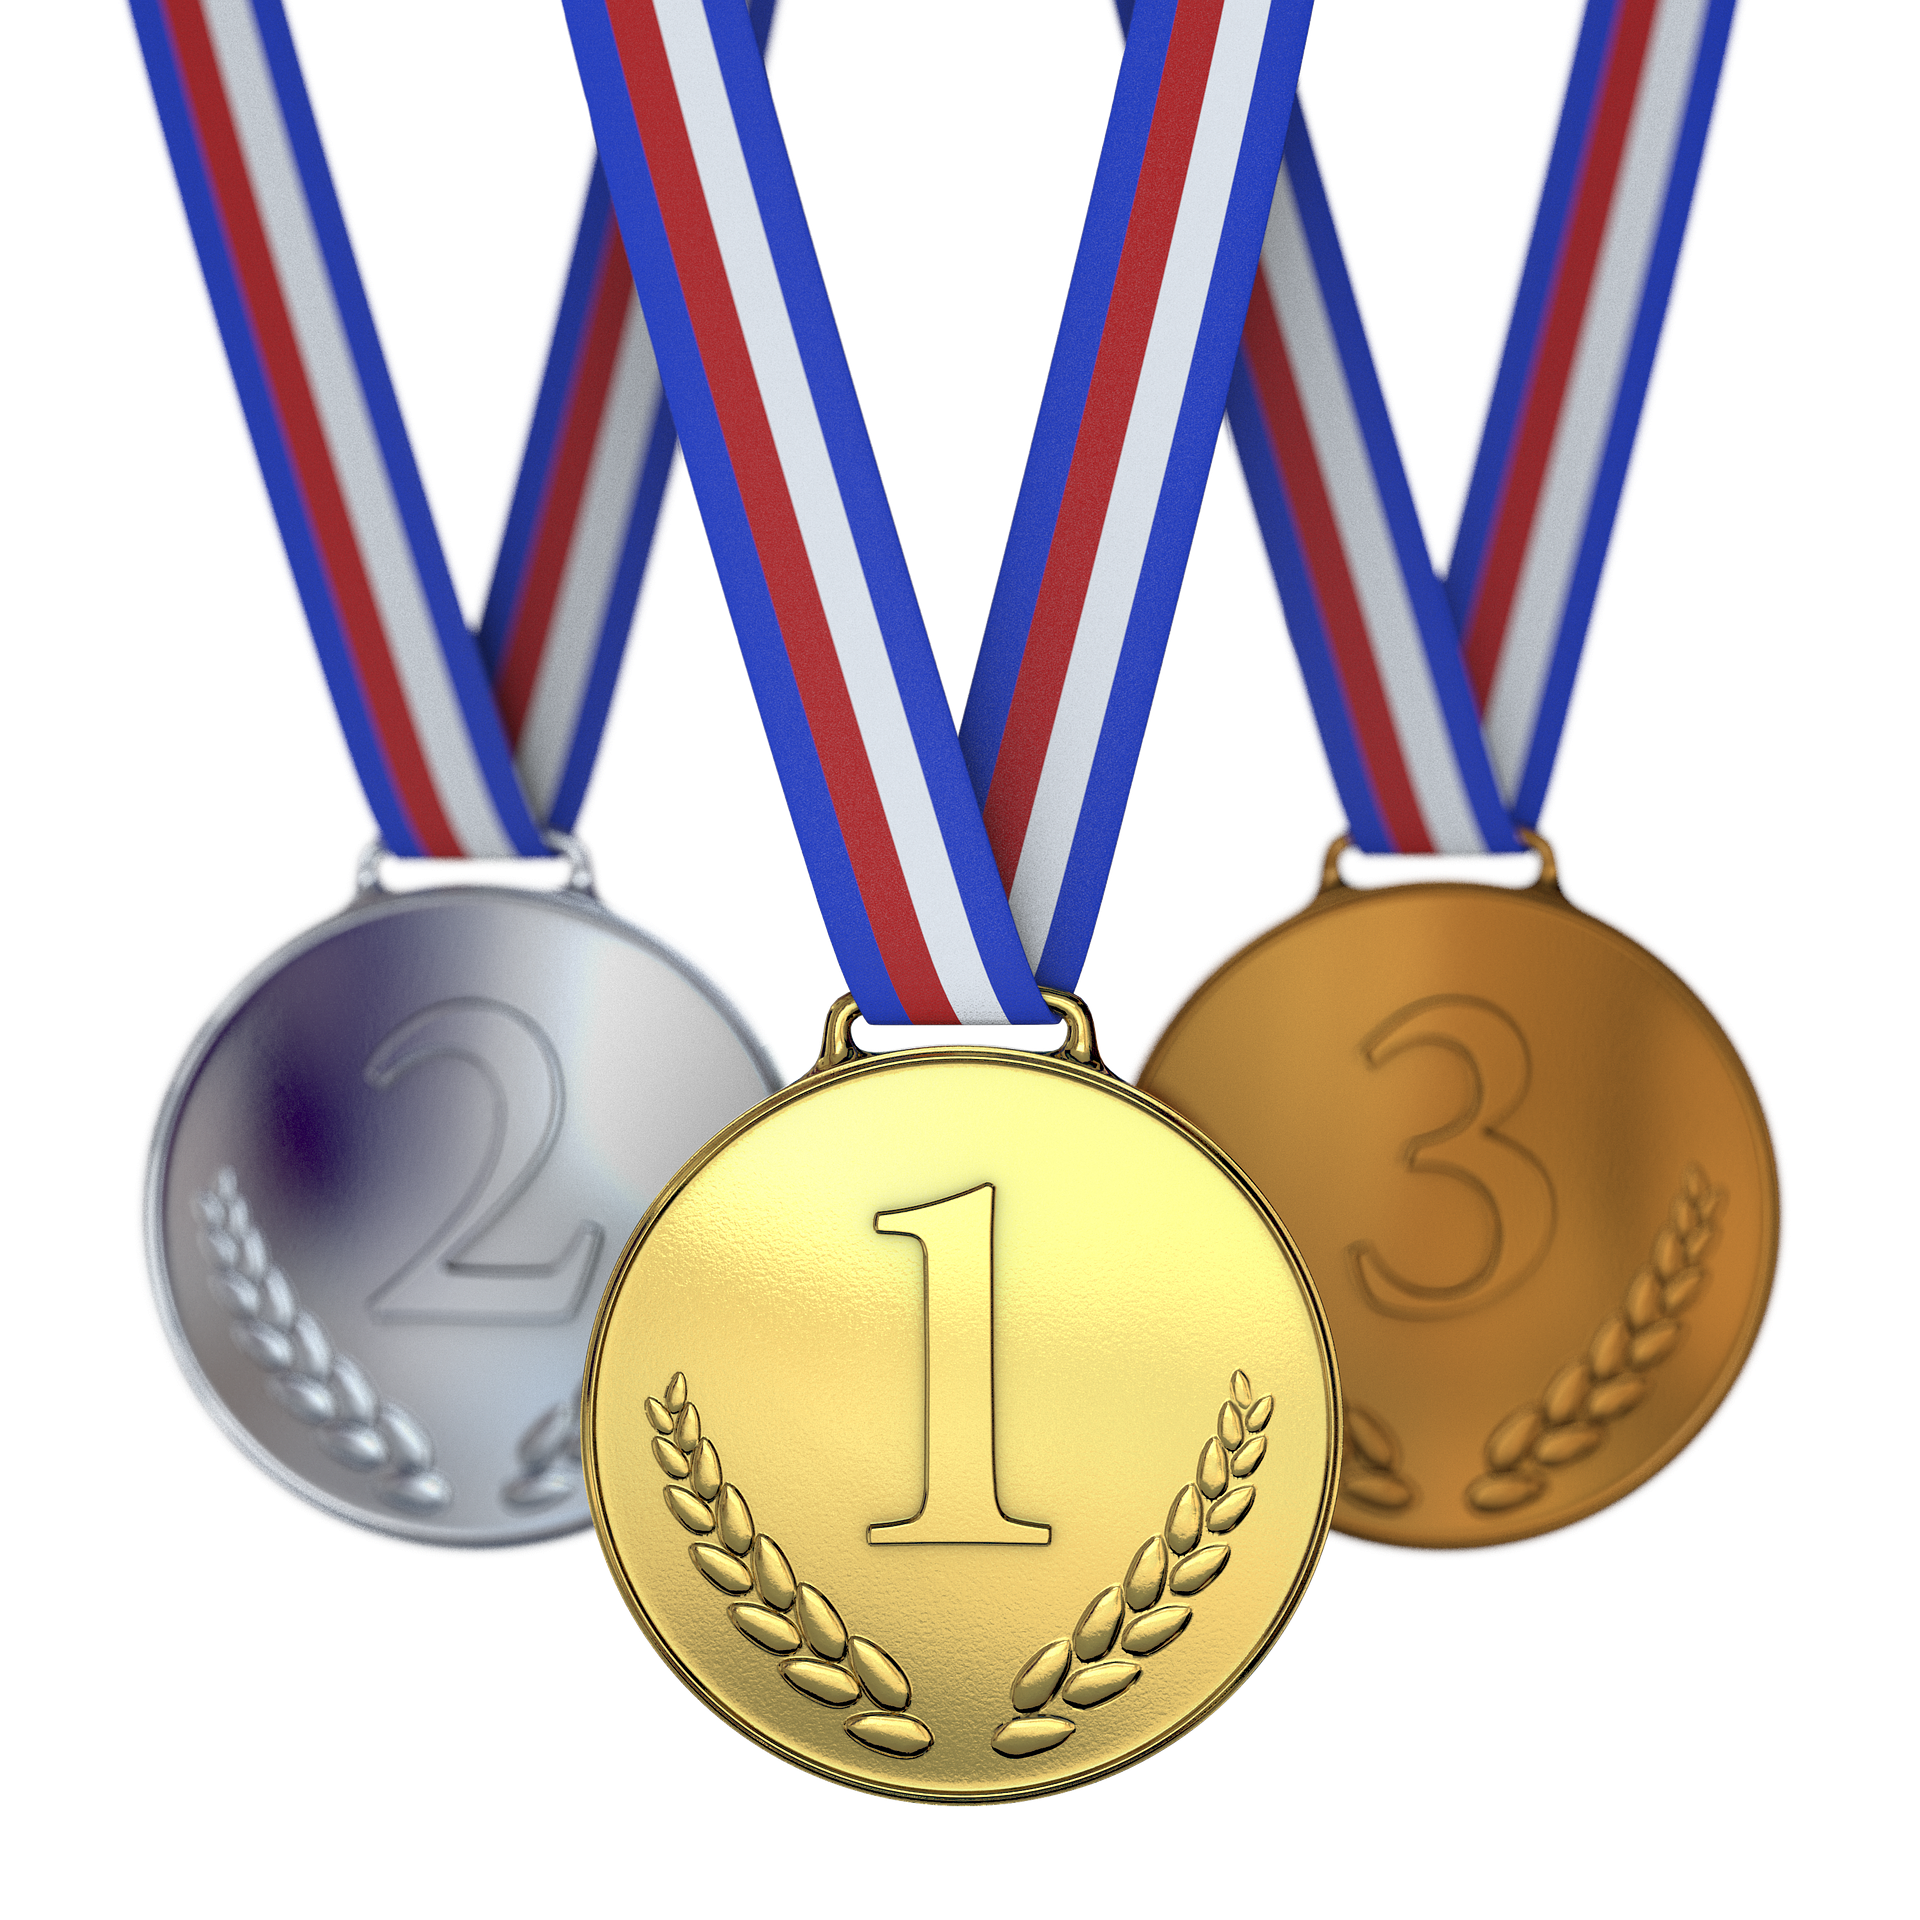 medals-g7b4283803_1920.png